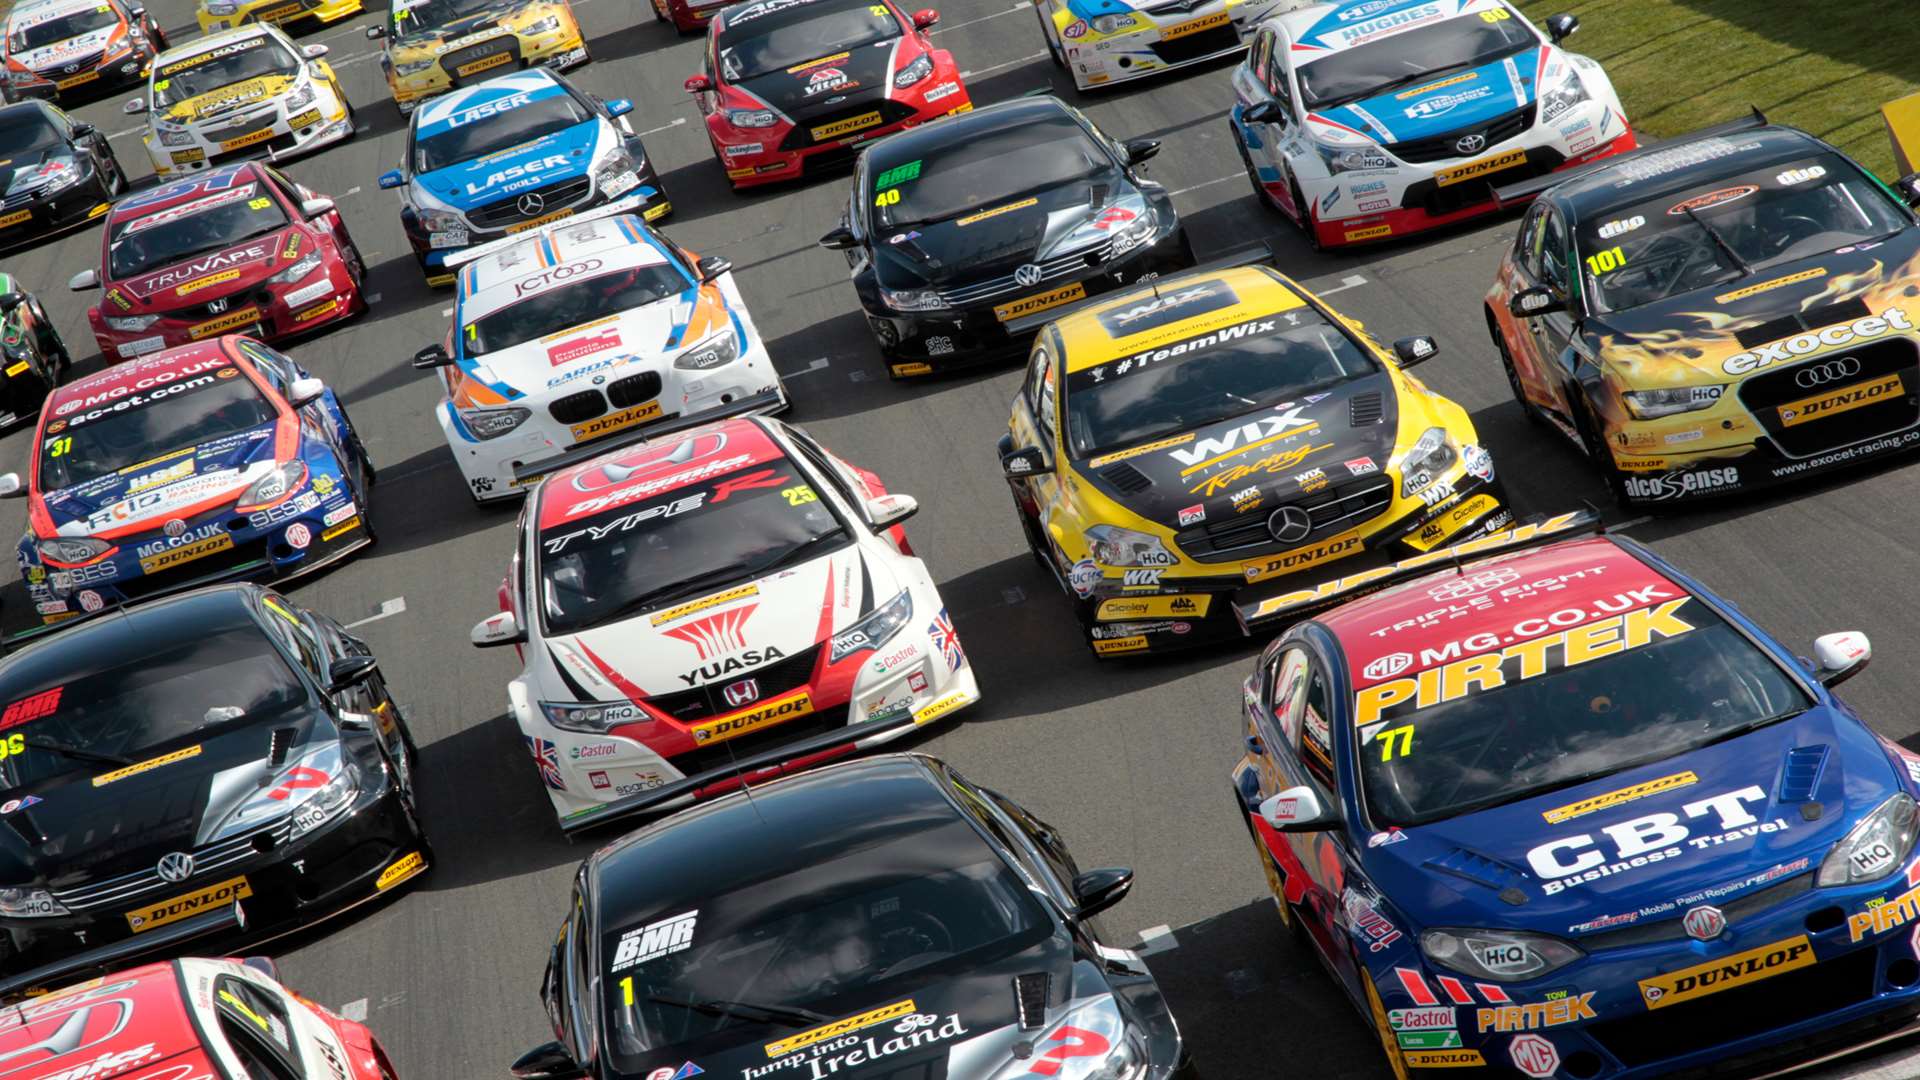 A bumper grid of 28 cars will contest the BTCC opener at Brands Hatch